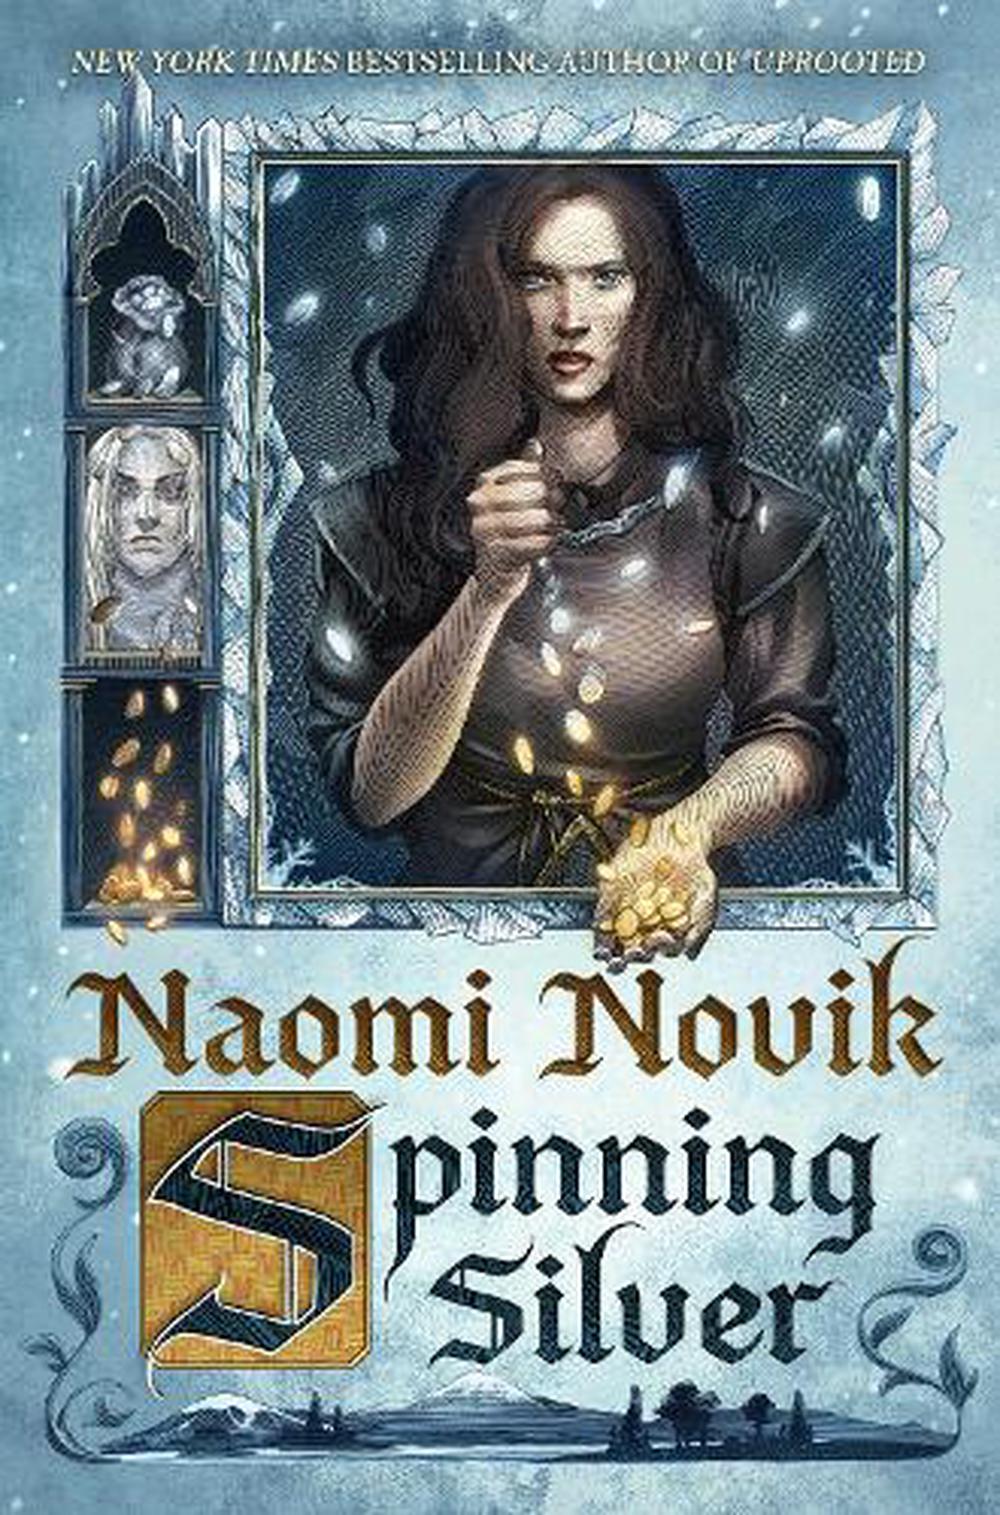 goodreads spinning silver